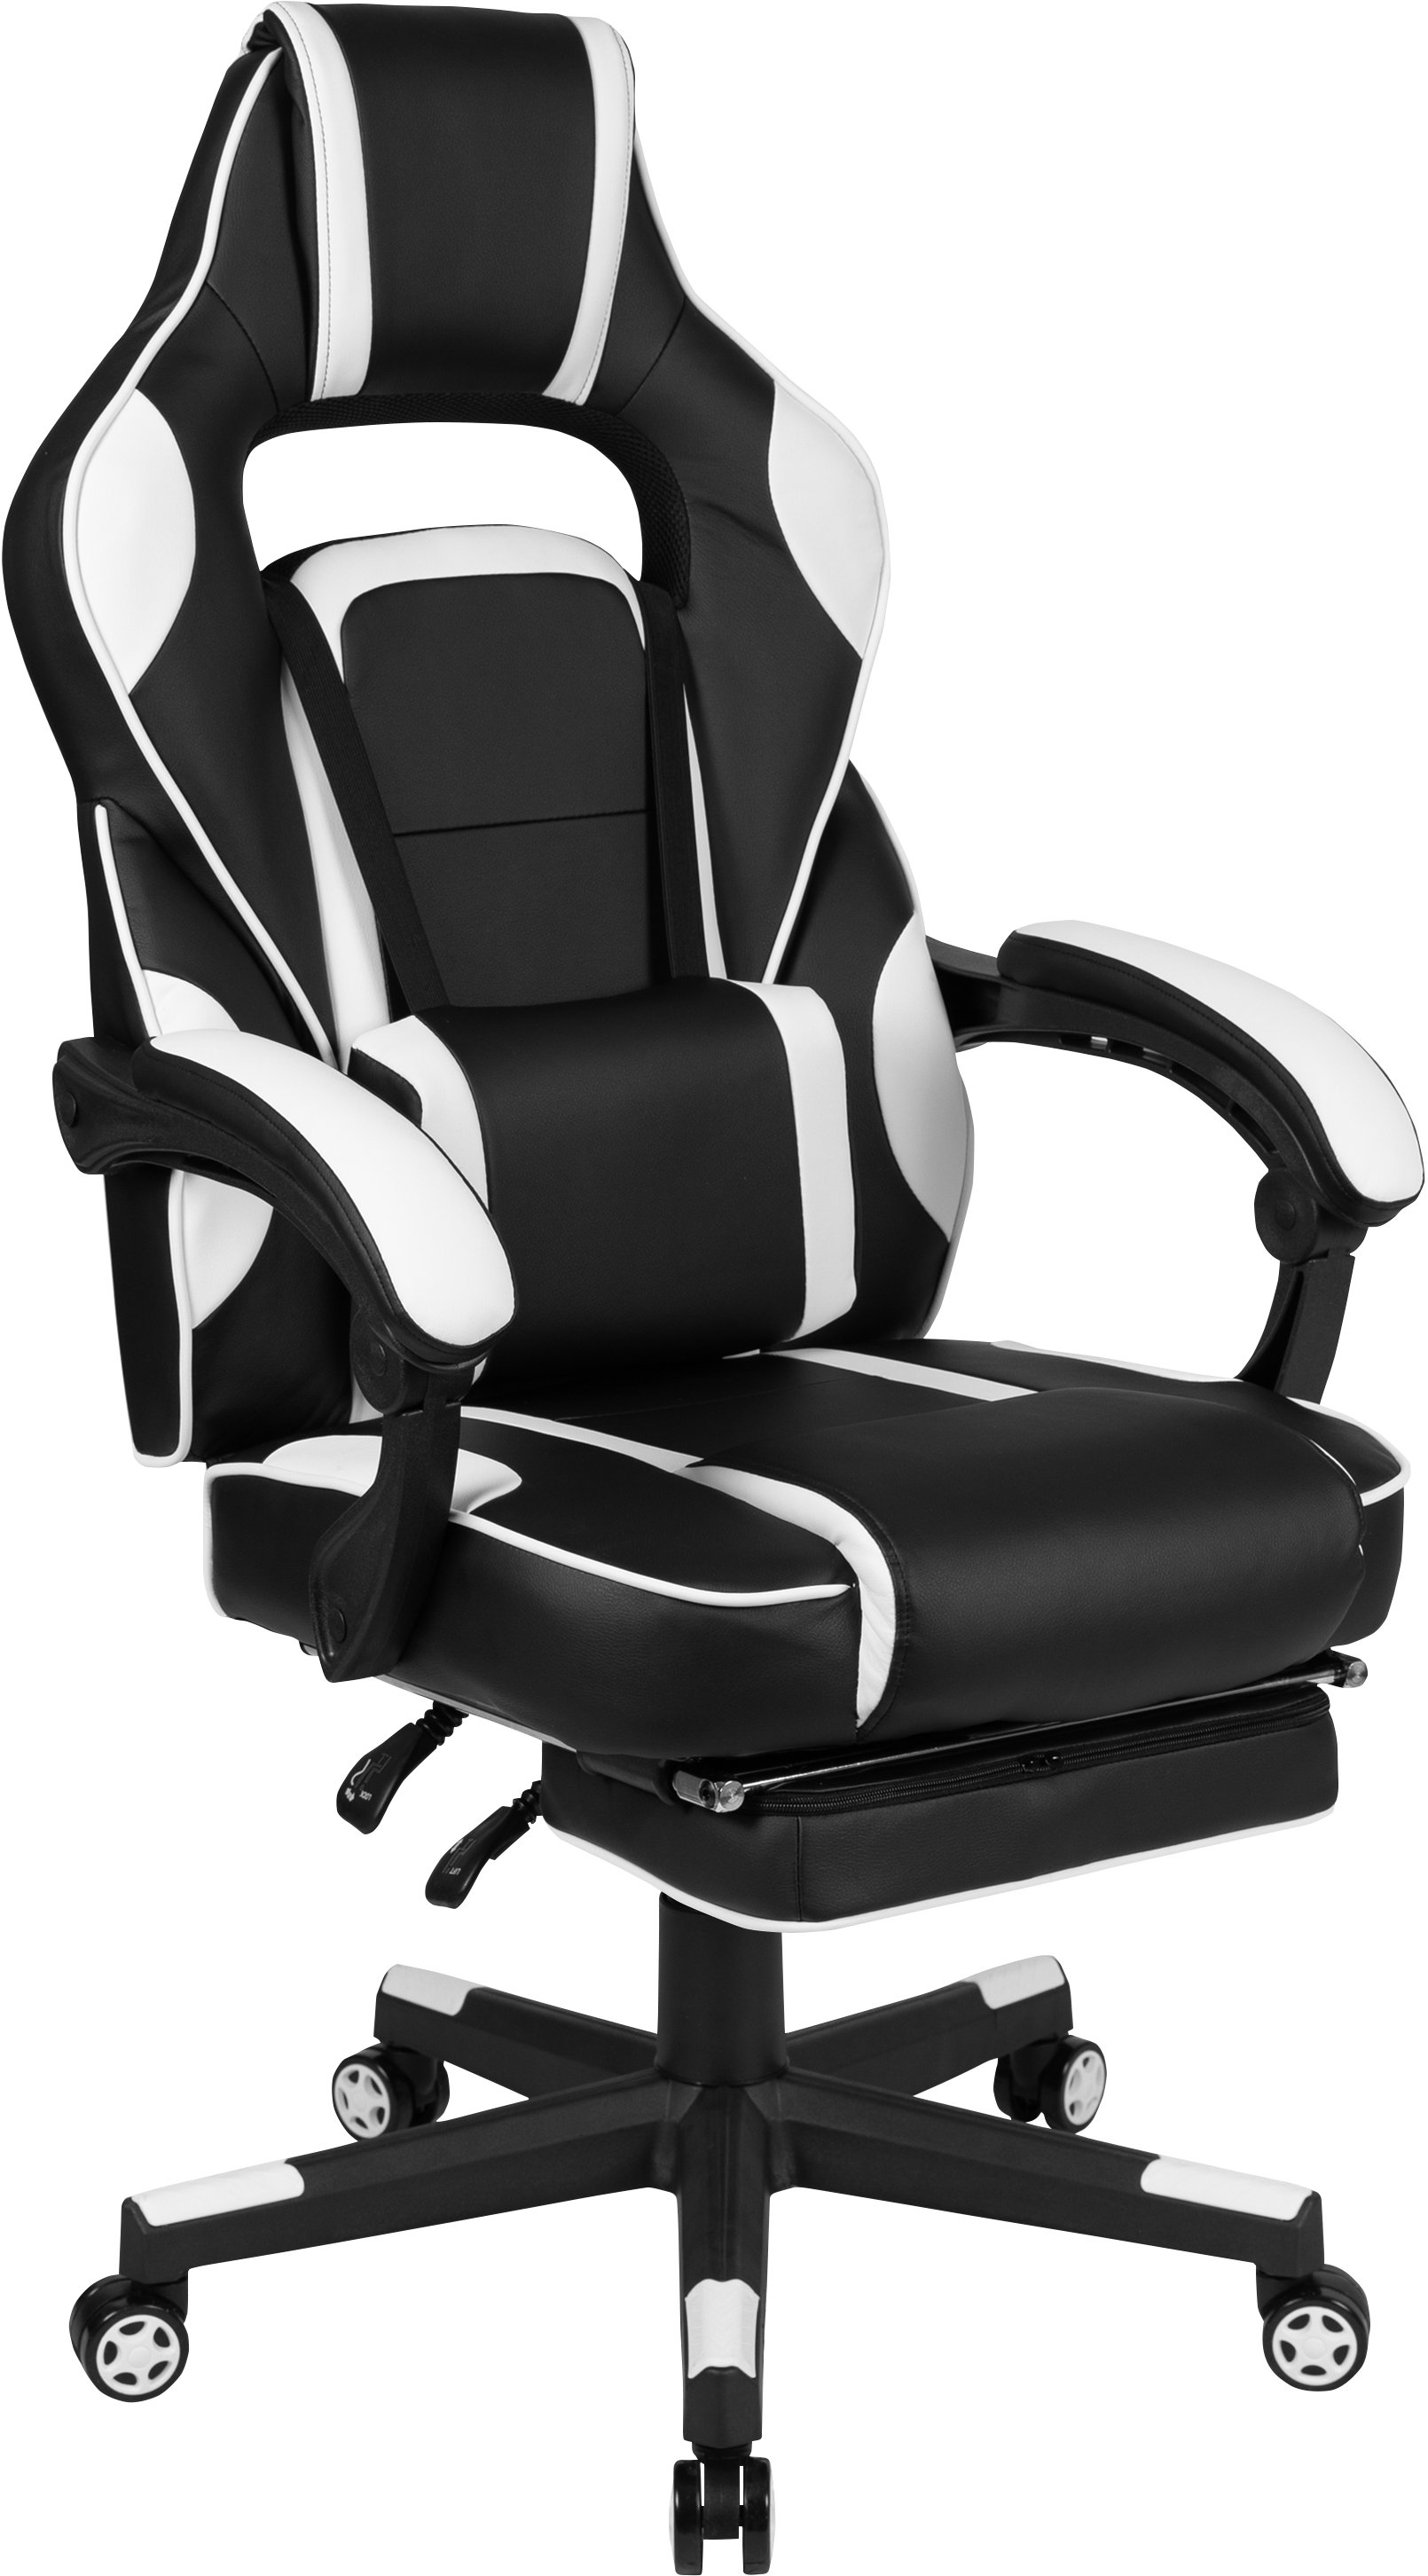 White and Black Gaming Swivel Chair - X40 | RC Willey